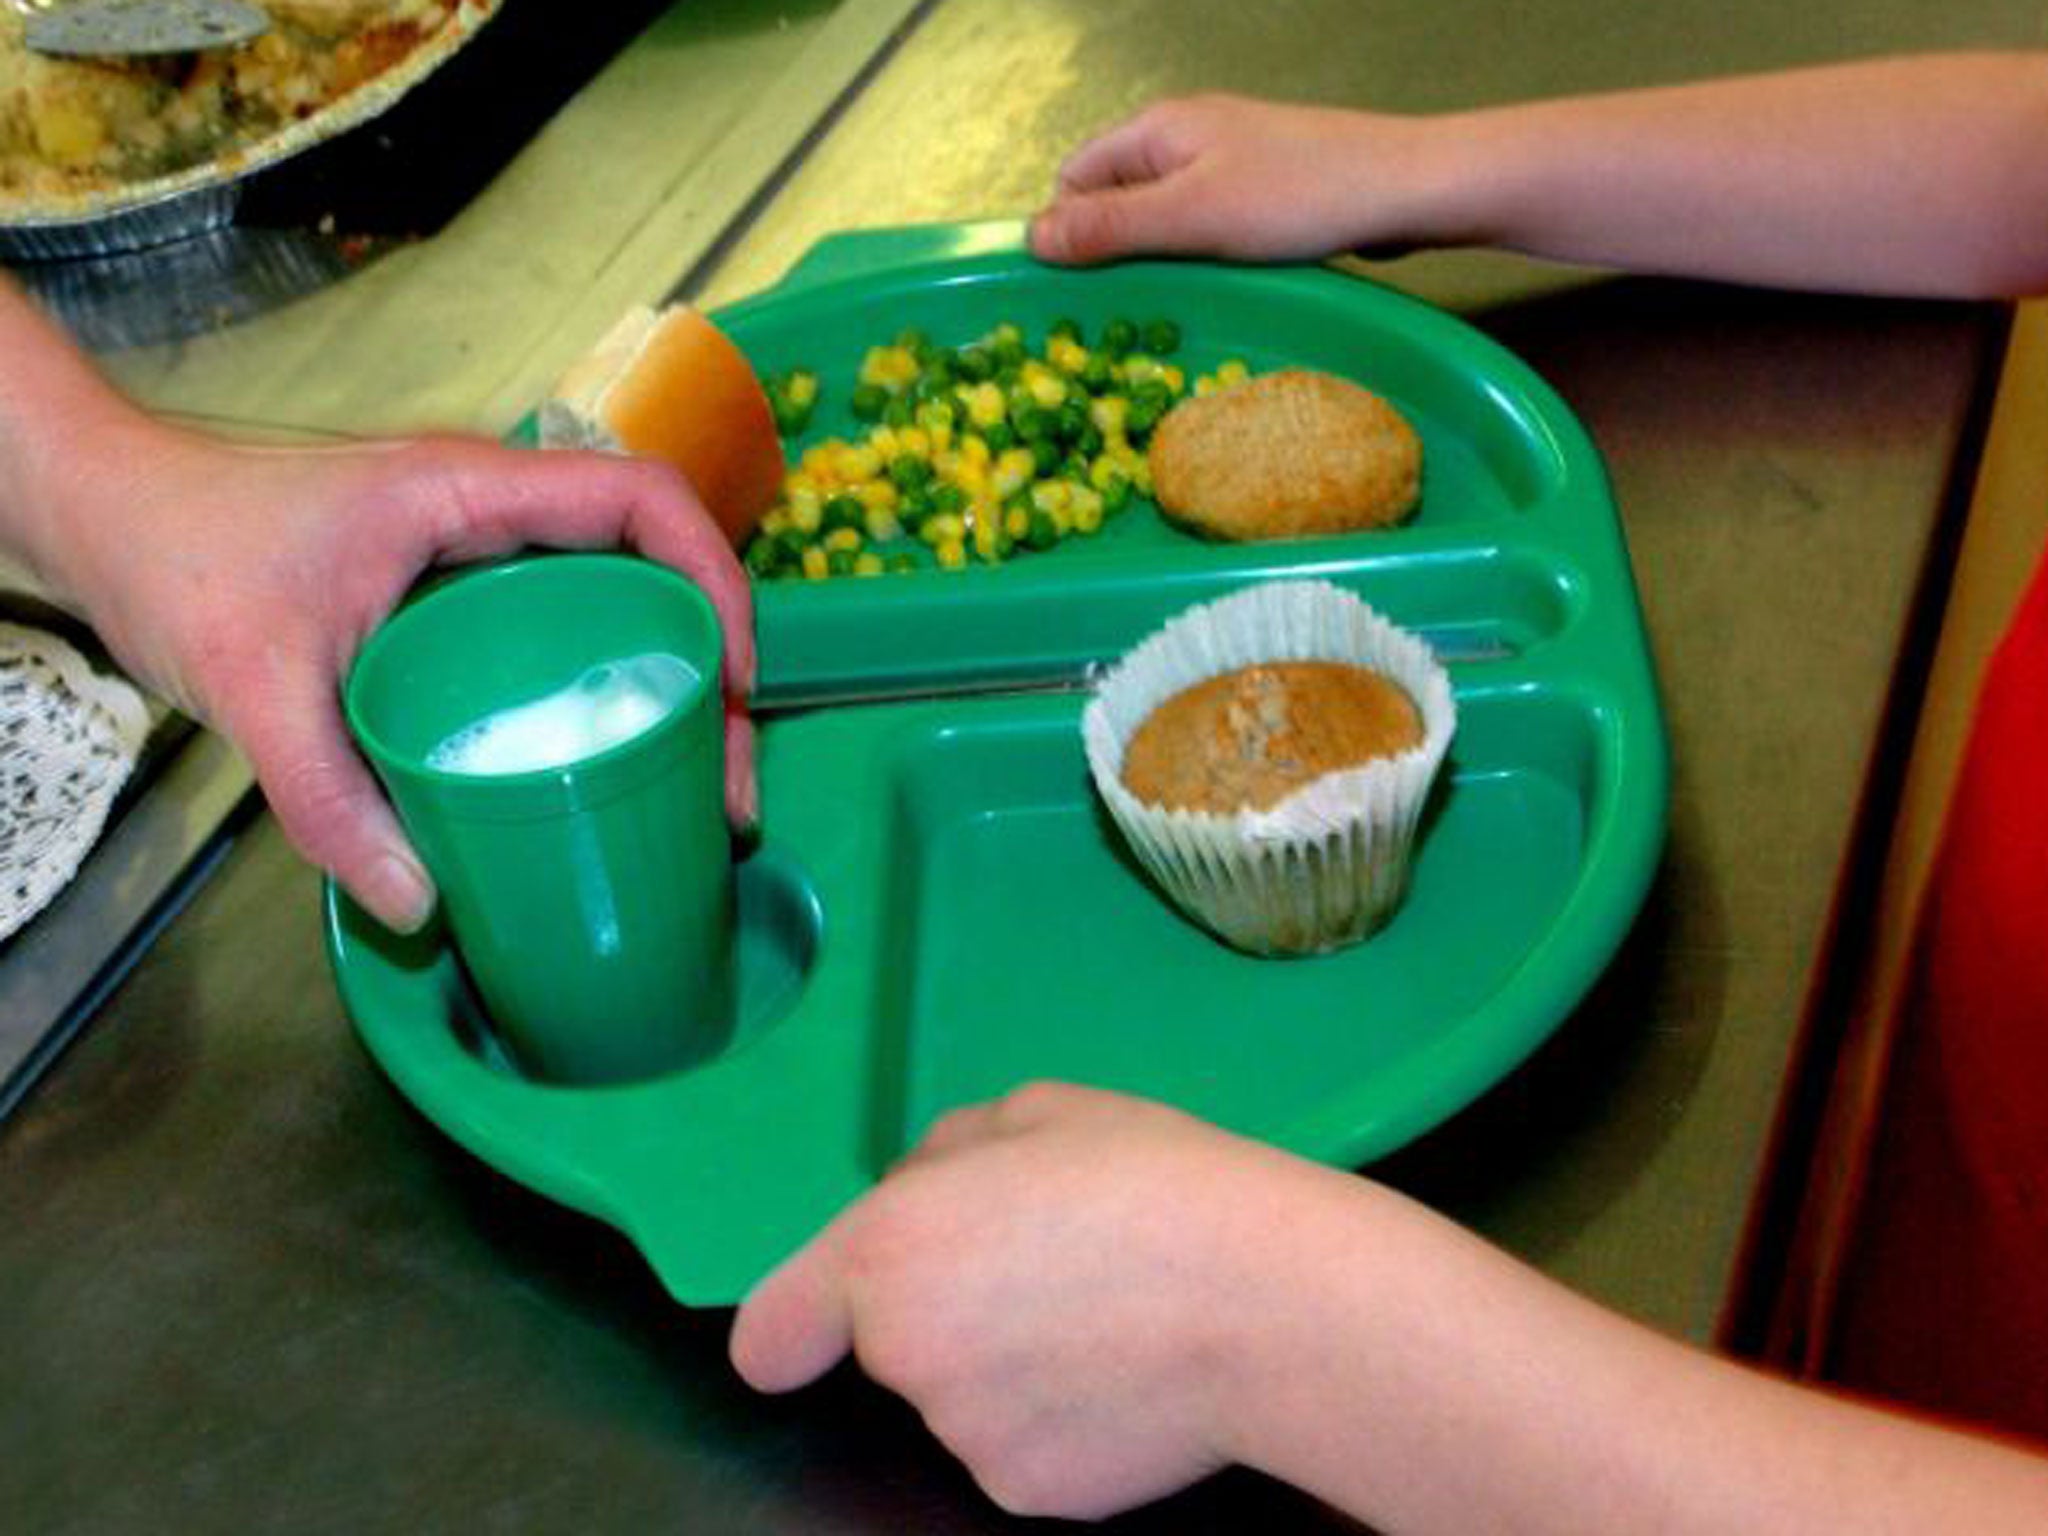 Free school meals could soon be scrapped and people paid to look after elderly neighbours as councils take desperate measures to deliver a “tidal wave” of spending cuts